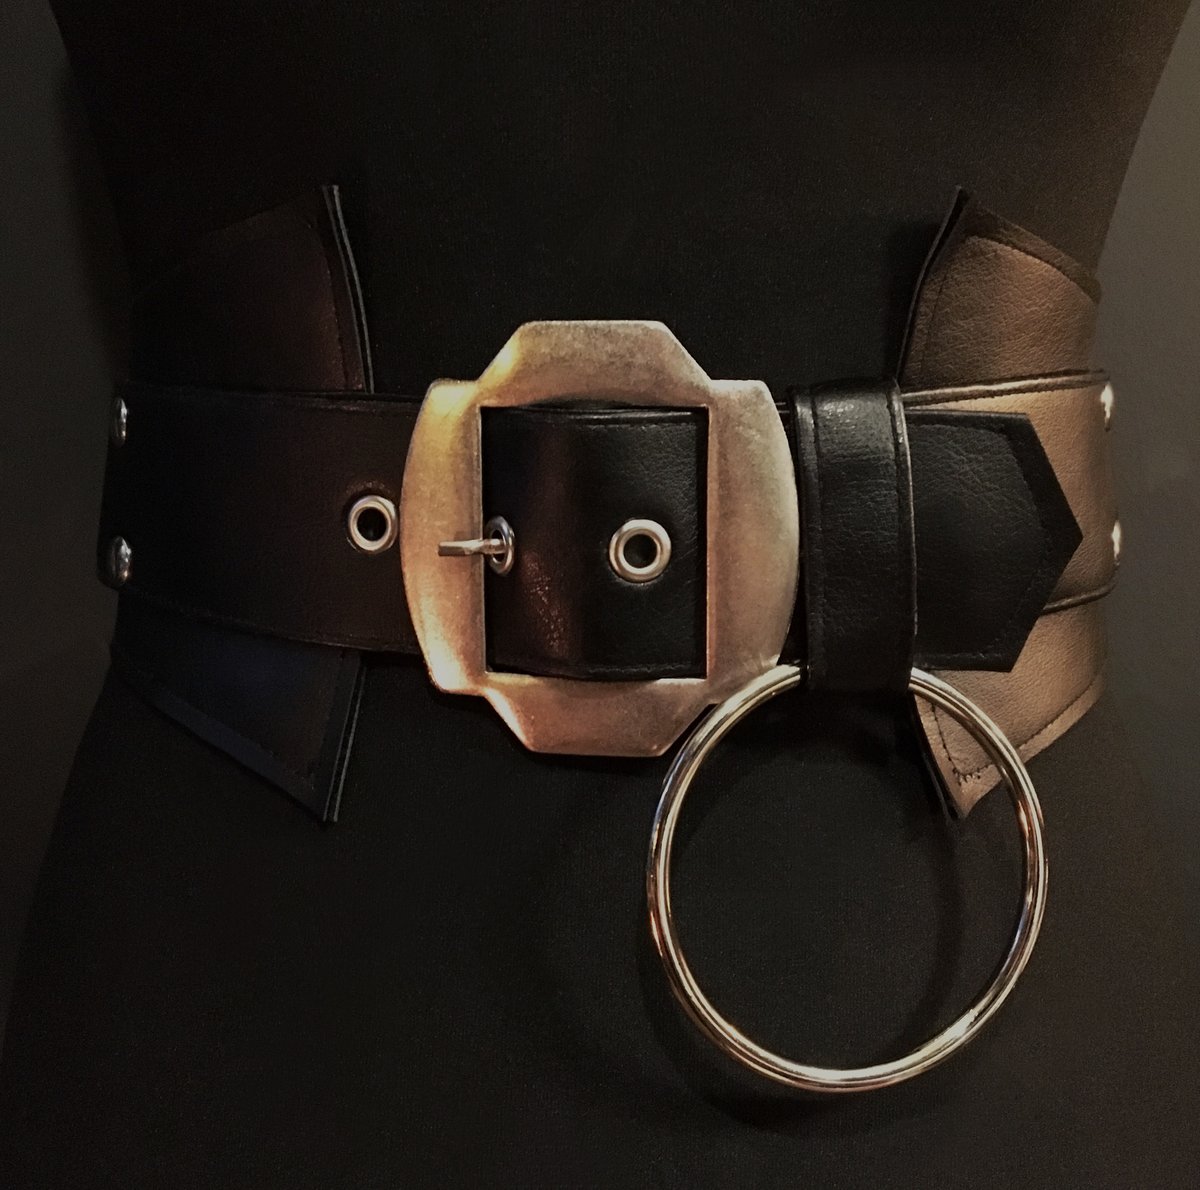 Vegan leather sincher with vintage buckle and o ring